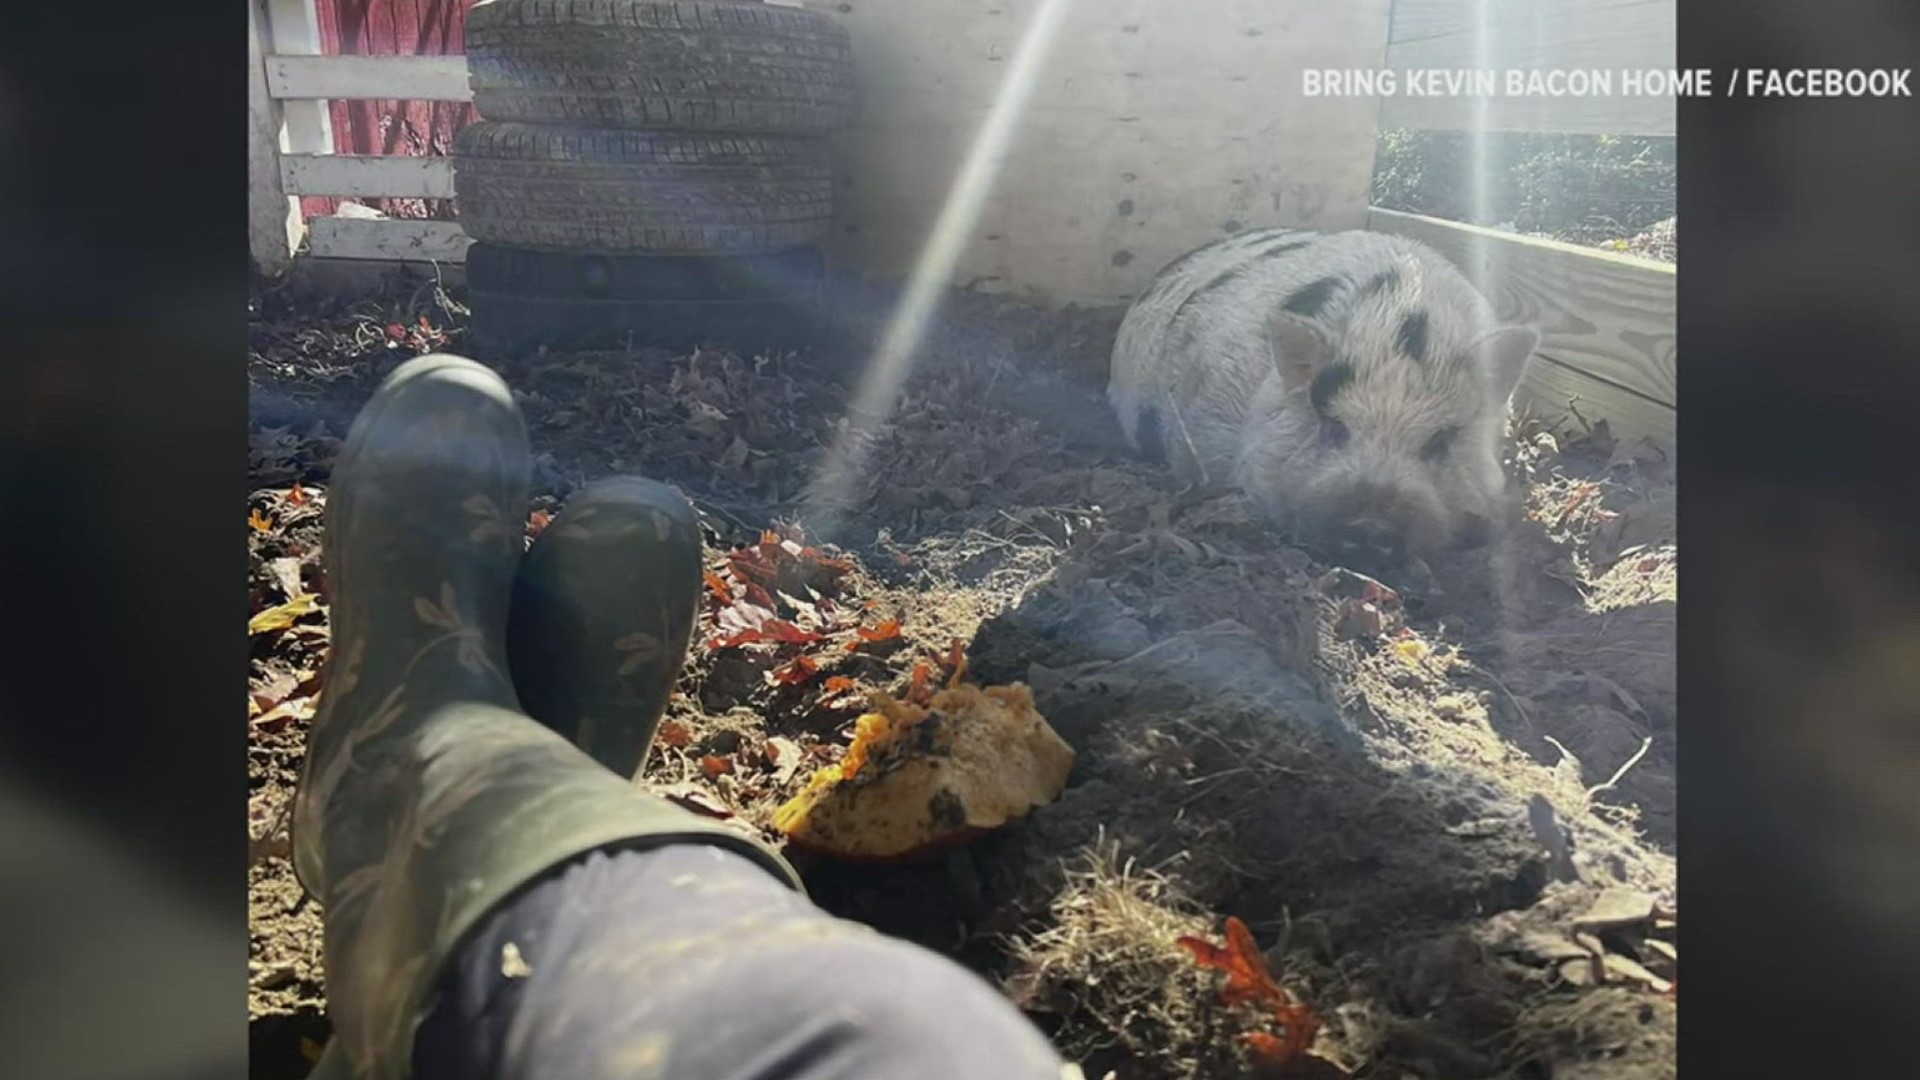 The wayward swine's time on the run has come to an end on Halloween, as 'Kevin Bacon' the pig has returned to his farm in Gettysburg.